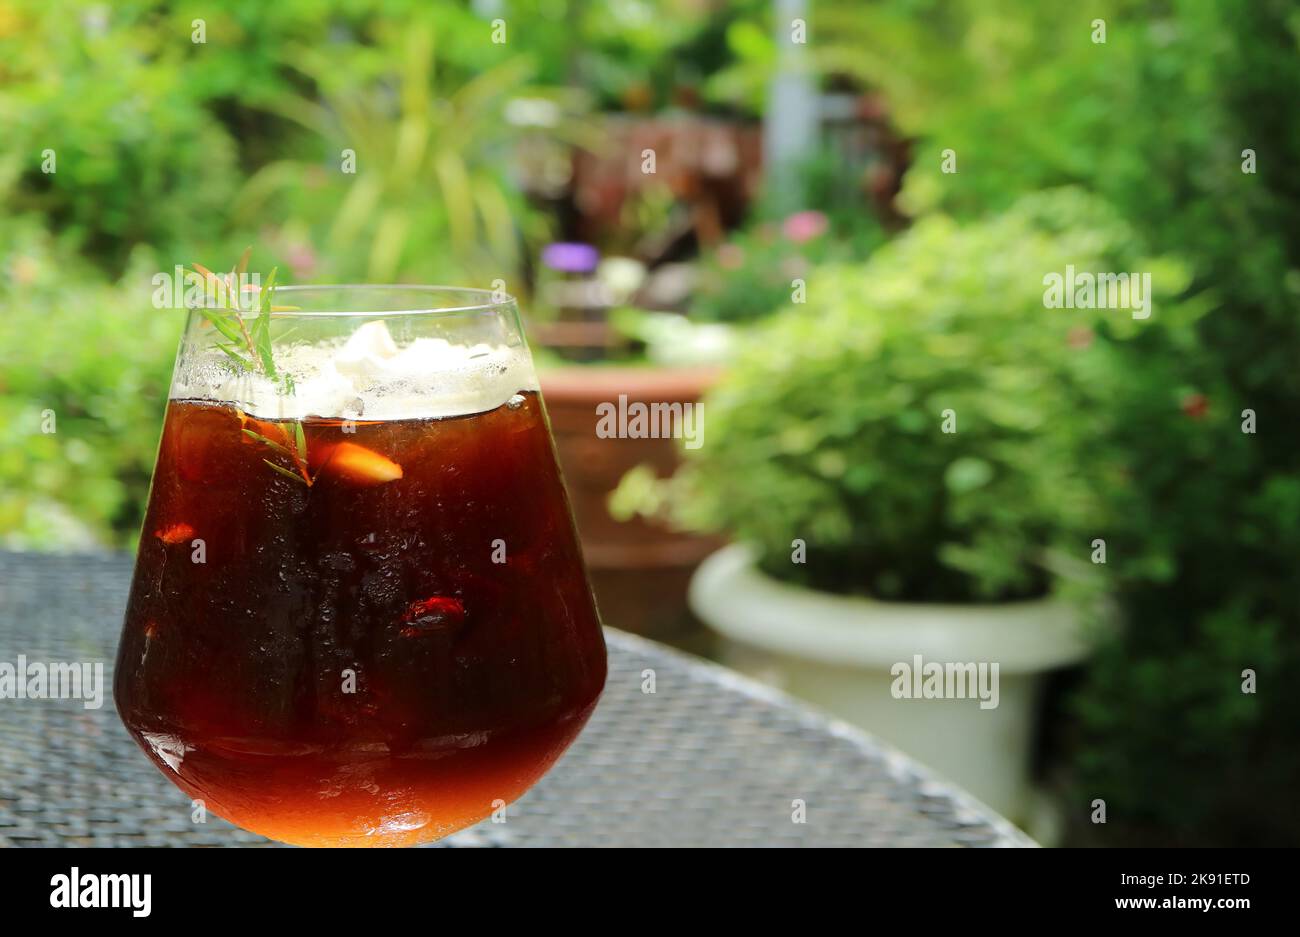 A Glass of Iced Coffee with Blurry Green Foliage in the Backdrop Stock Photo